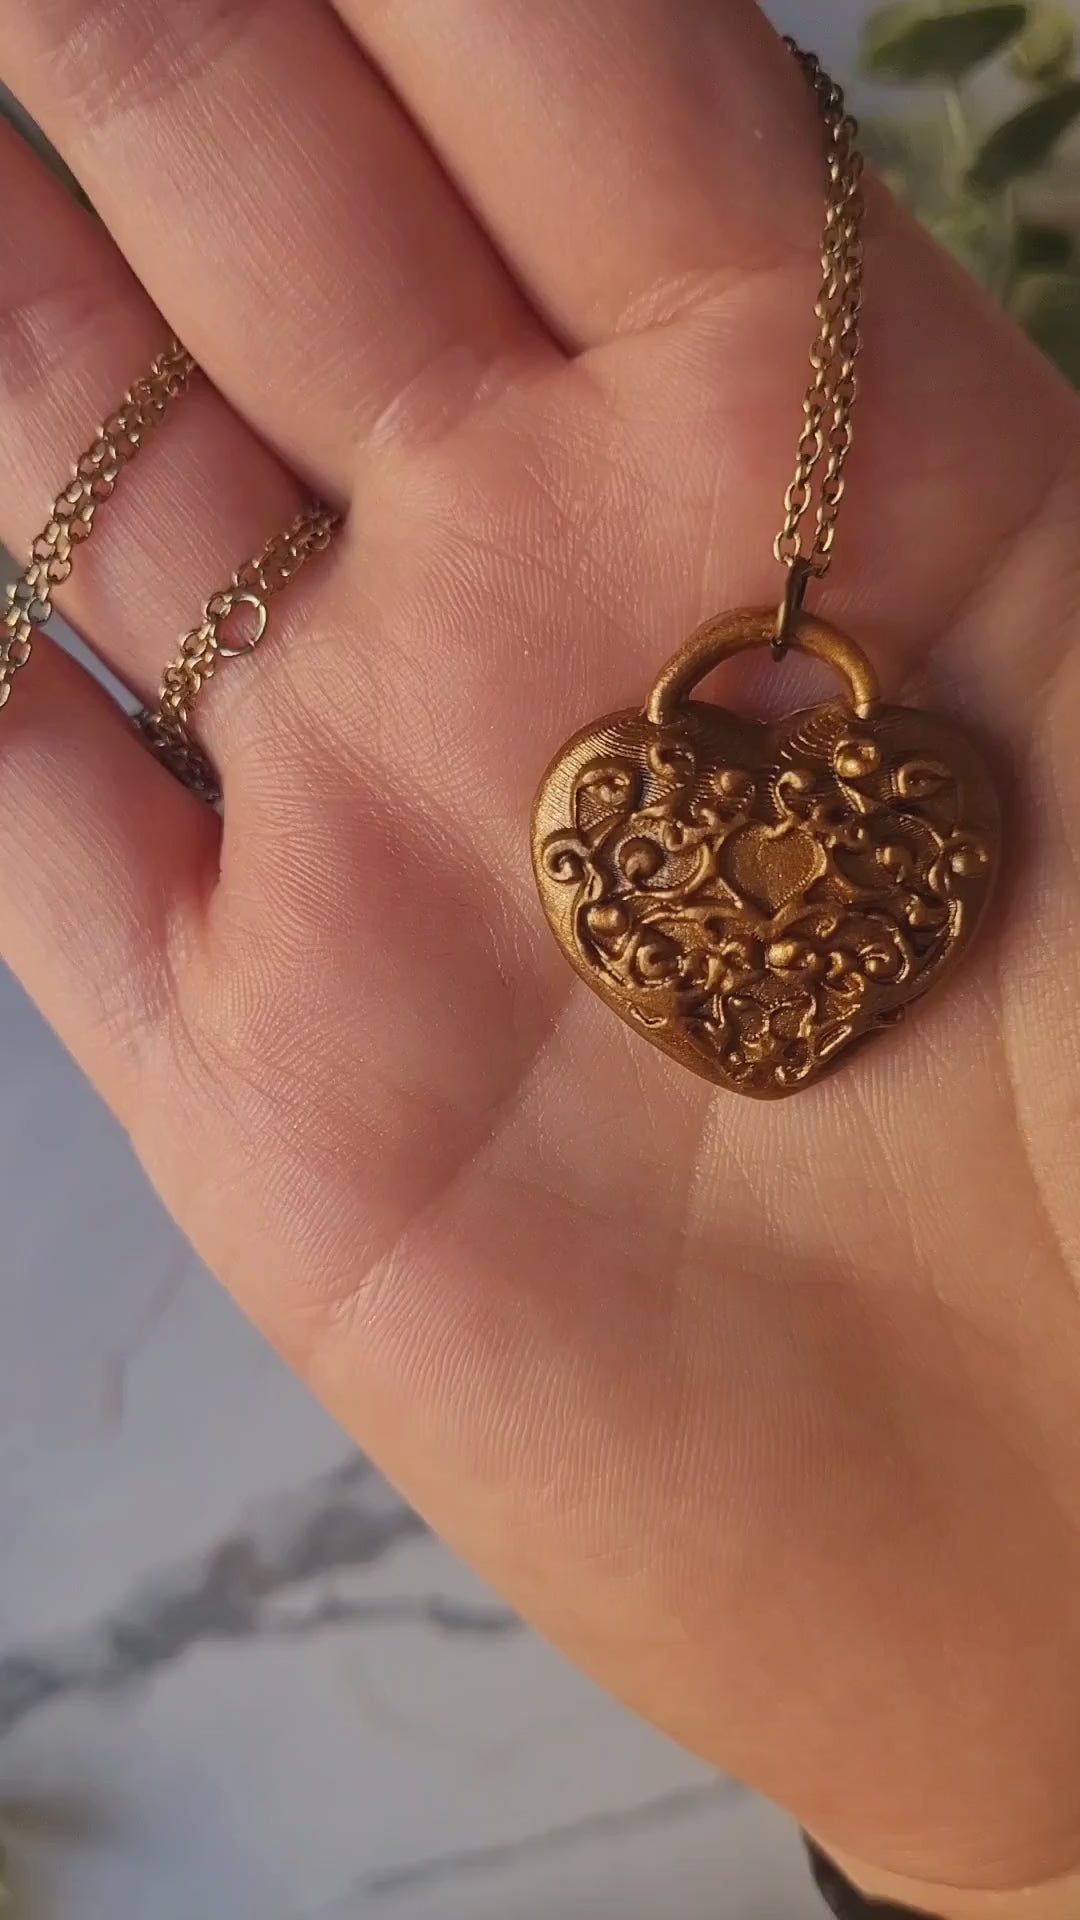 video close up of heart shaped lock pendant with filigree in antique gold 